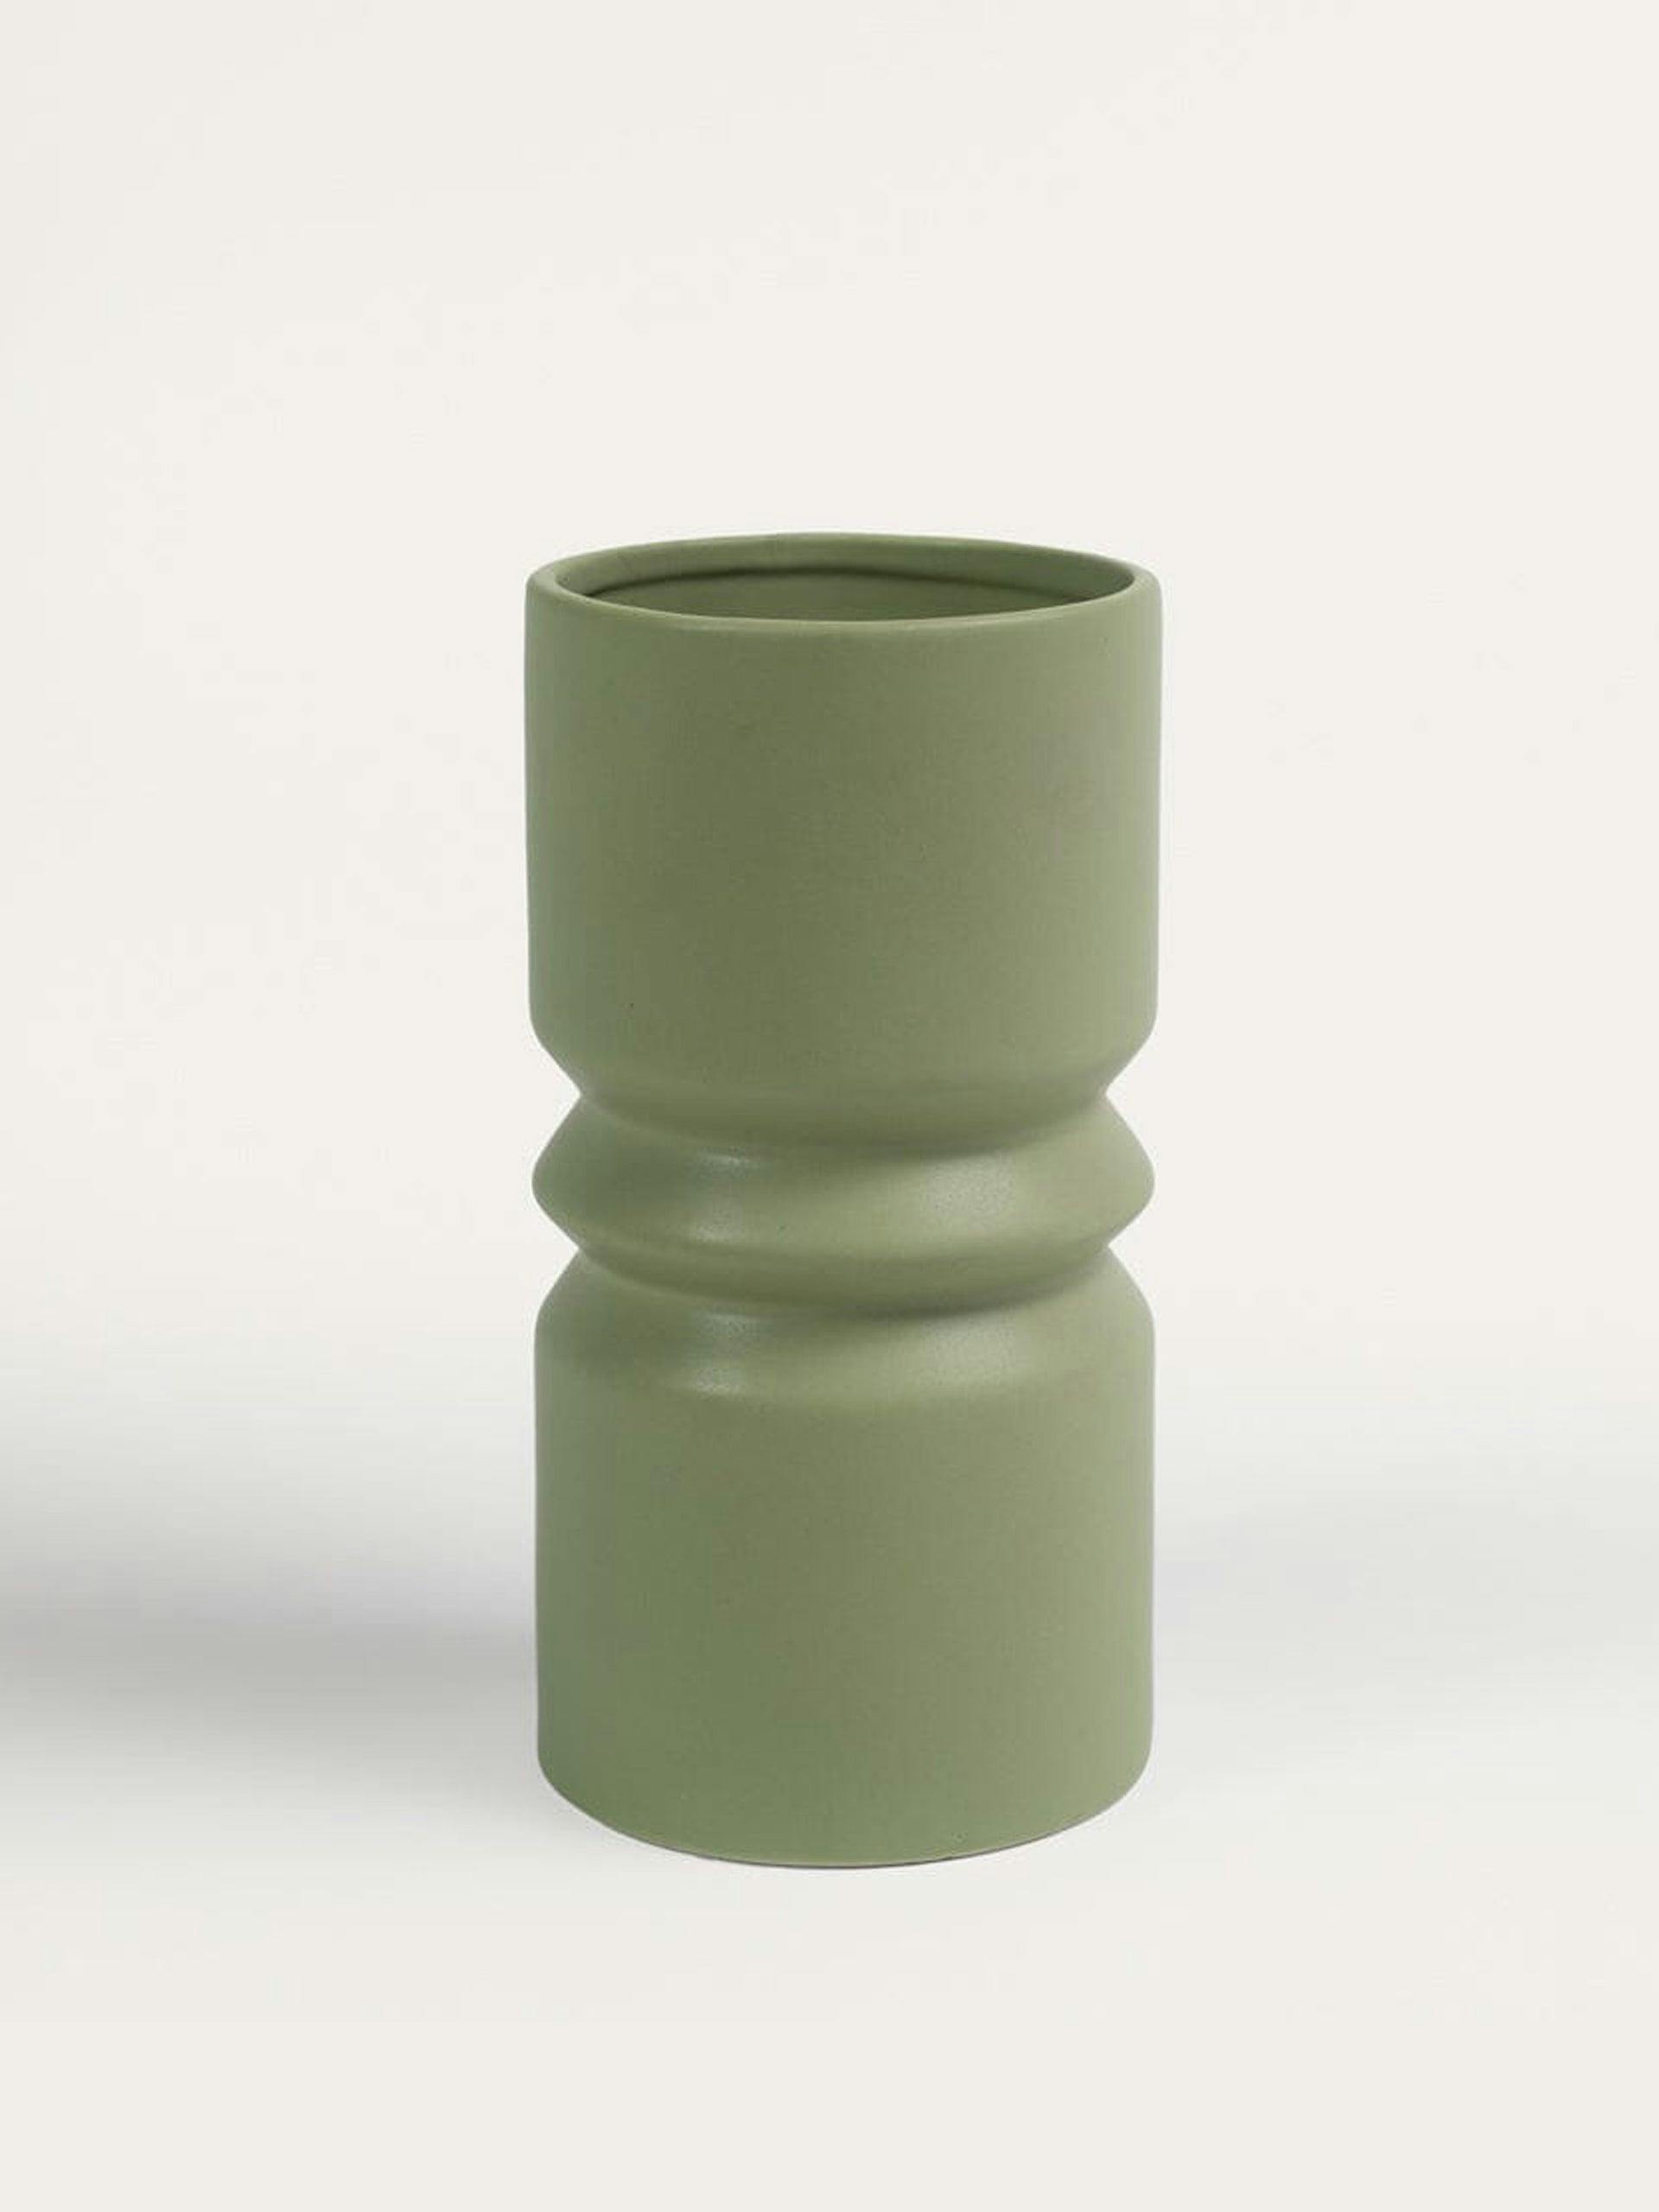 Green synched ceramic vase